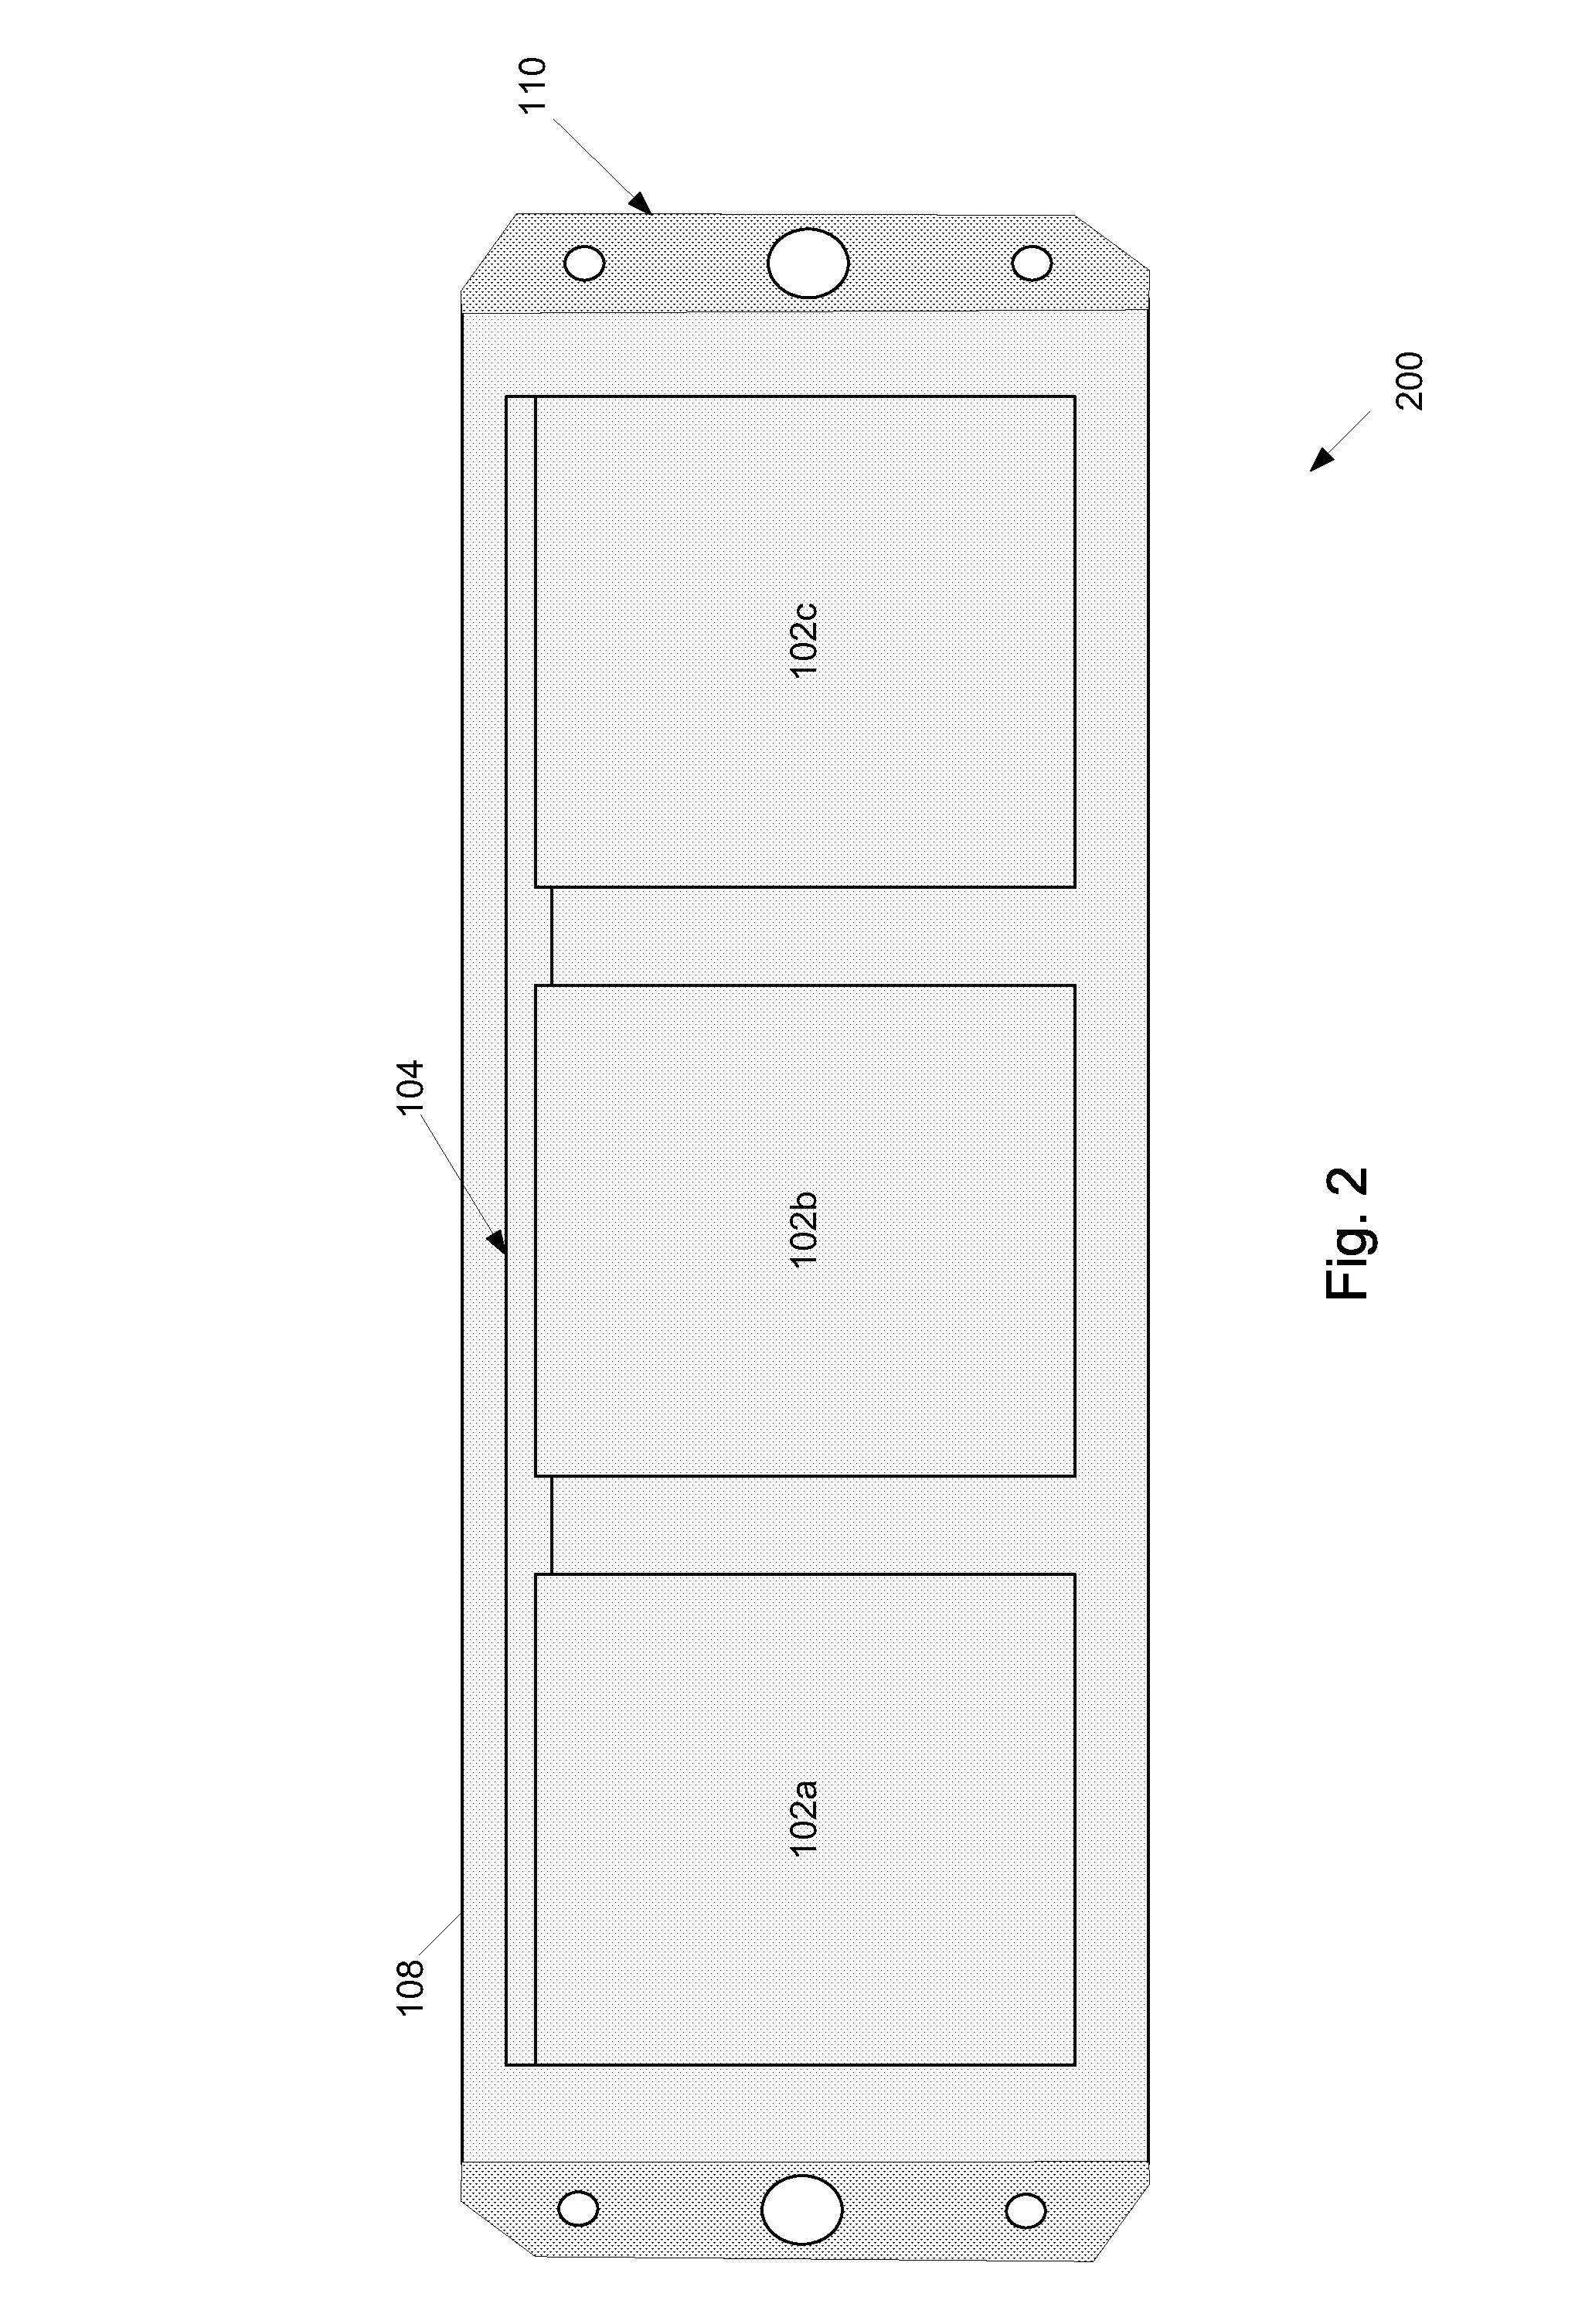 Battery assembly for battery powered portable devices